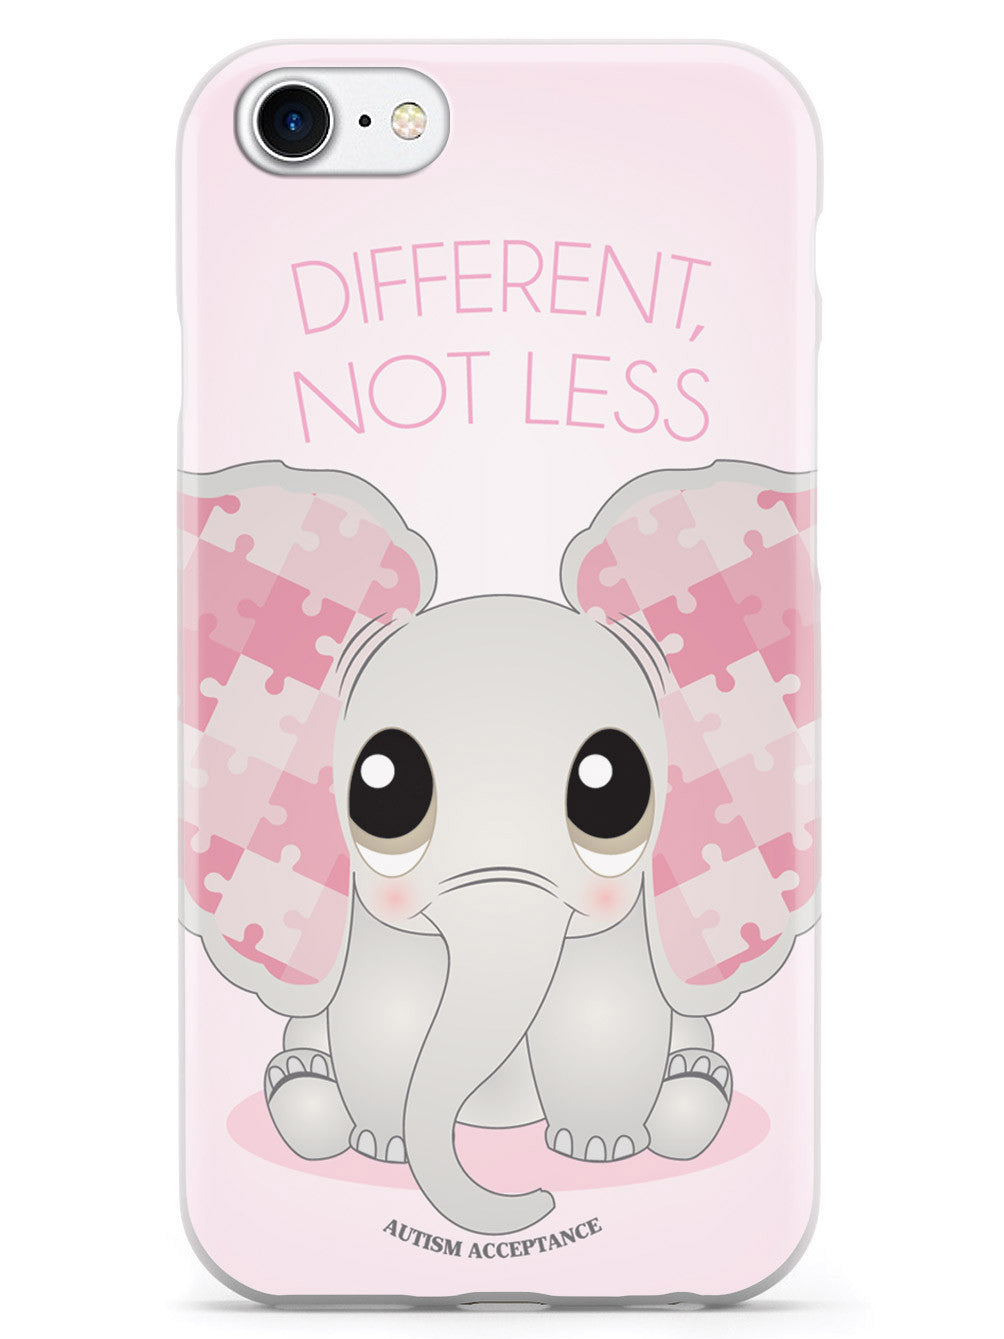 Different, Not Less - Elephant - Autism Awareness Case